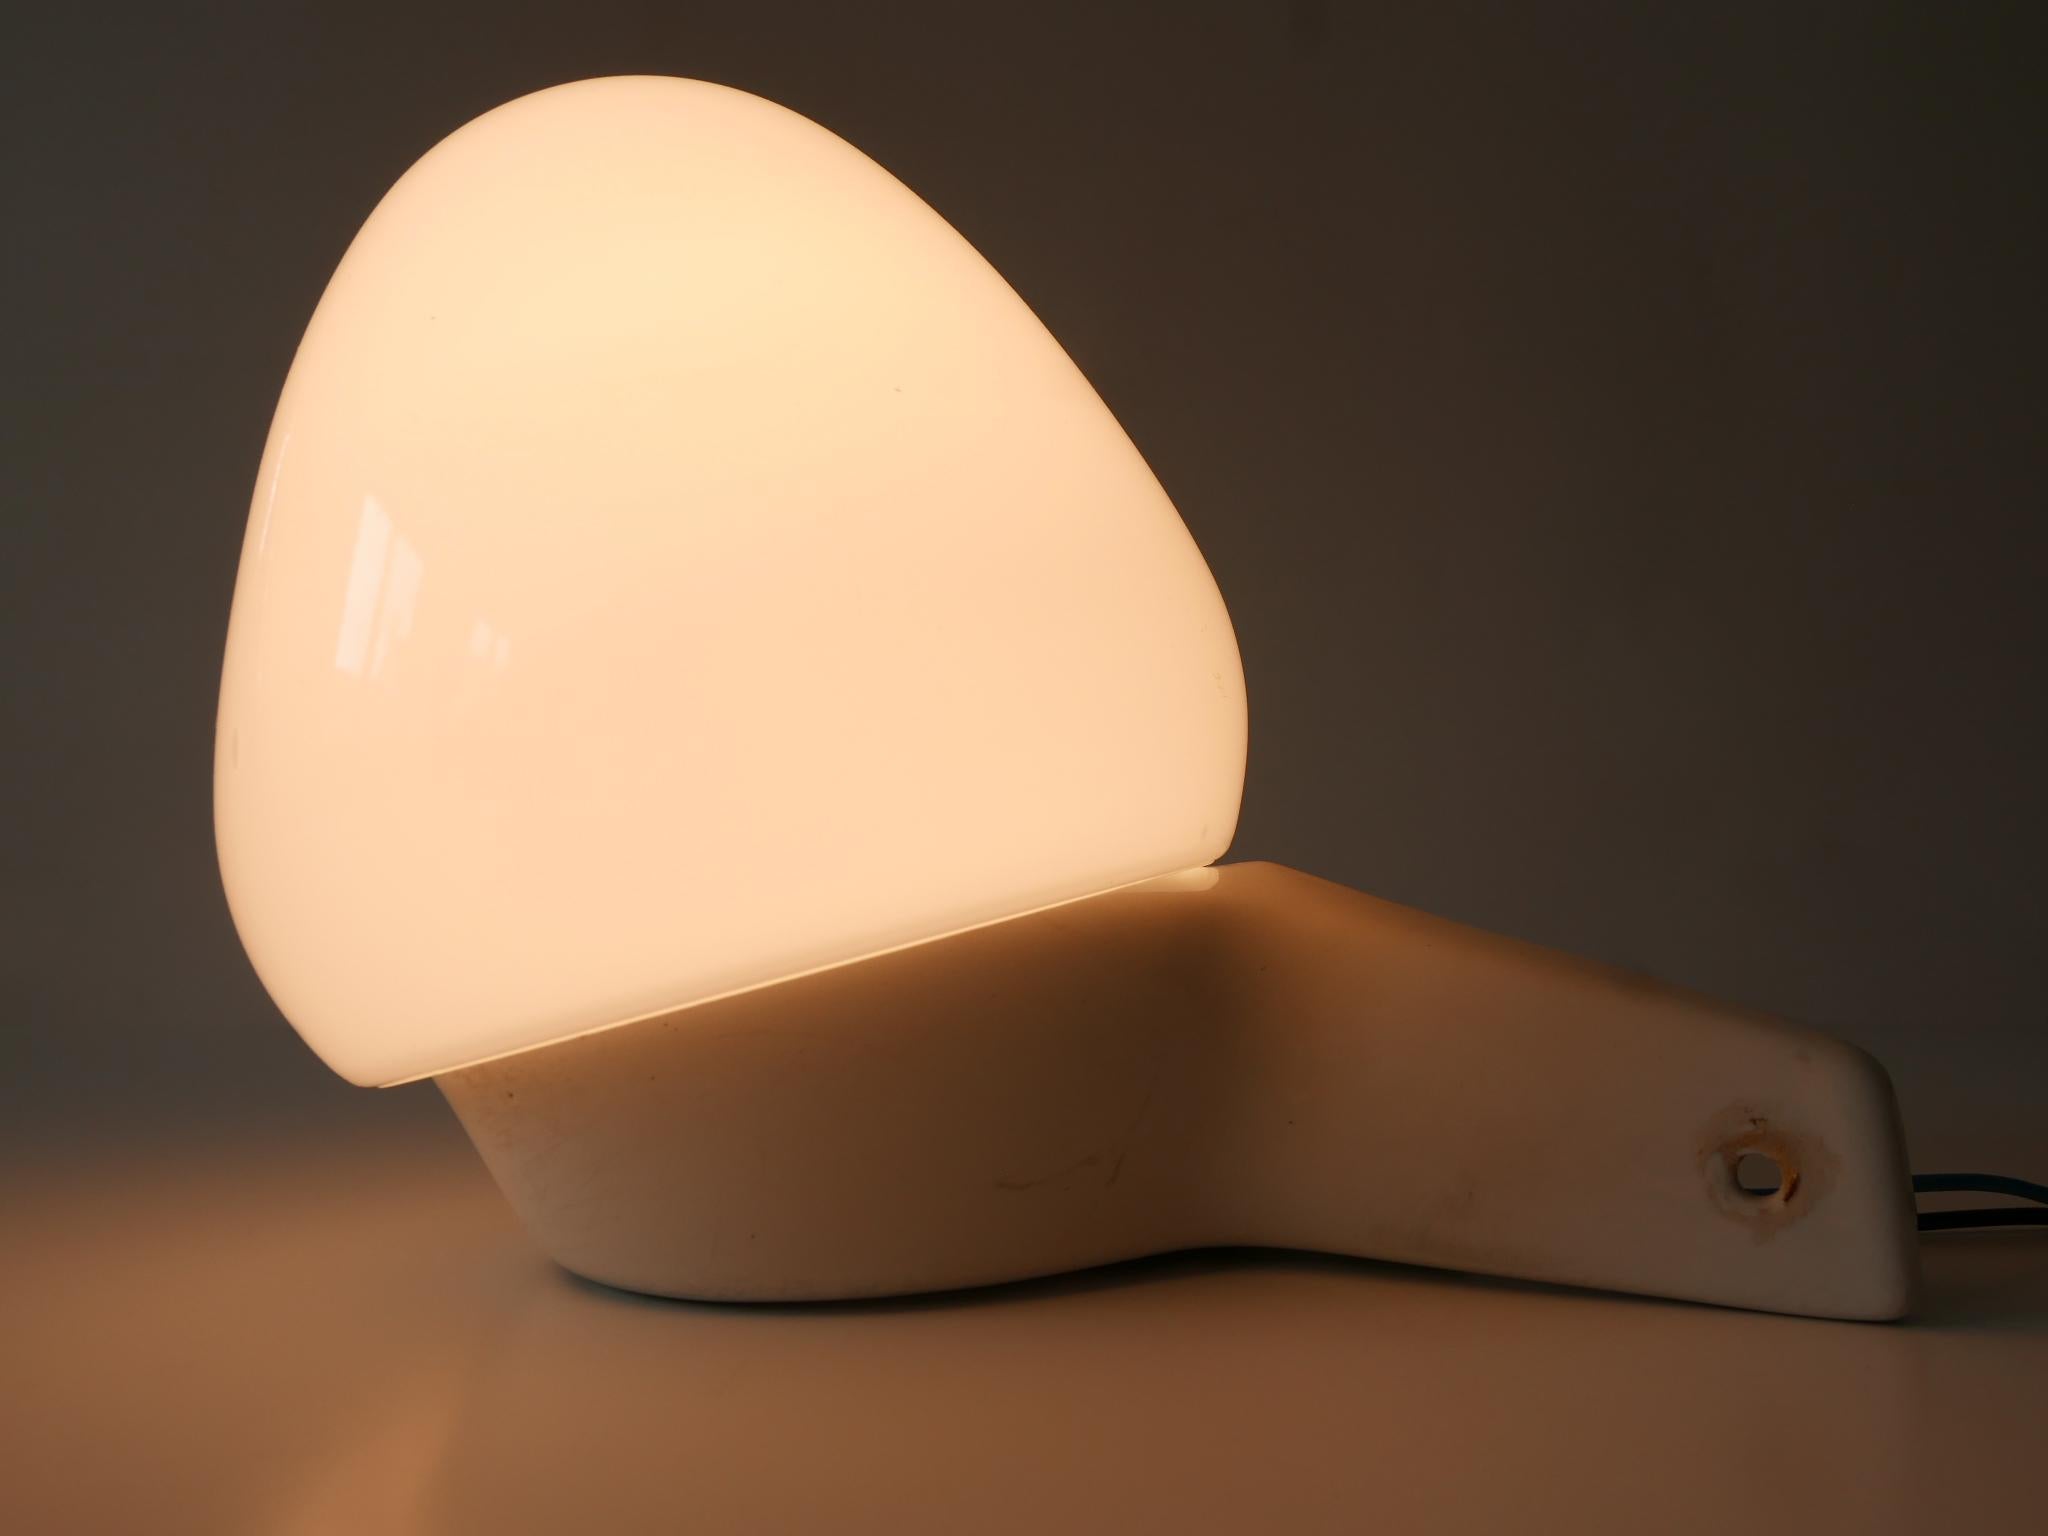 Glazed Mid-Century Modern Wall Lamp or Sconce by Wilhelm Wagenfeld for Lindner 1950s For Sale